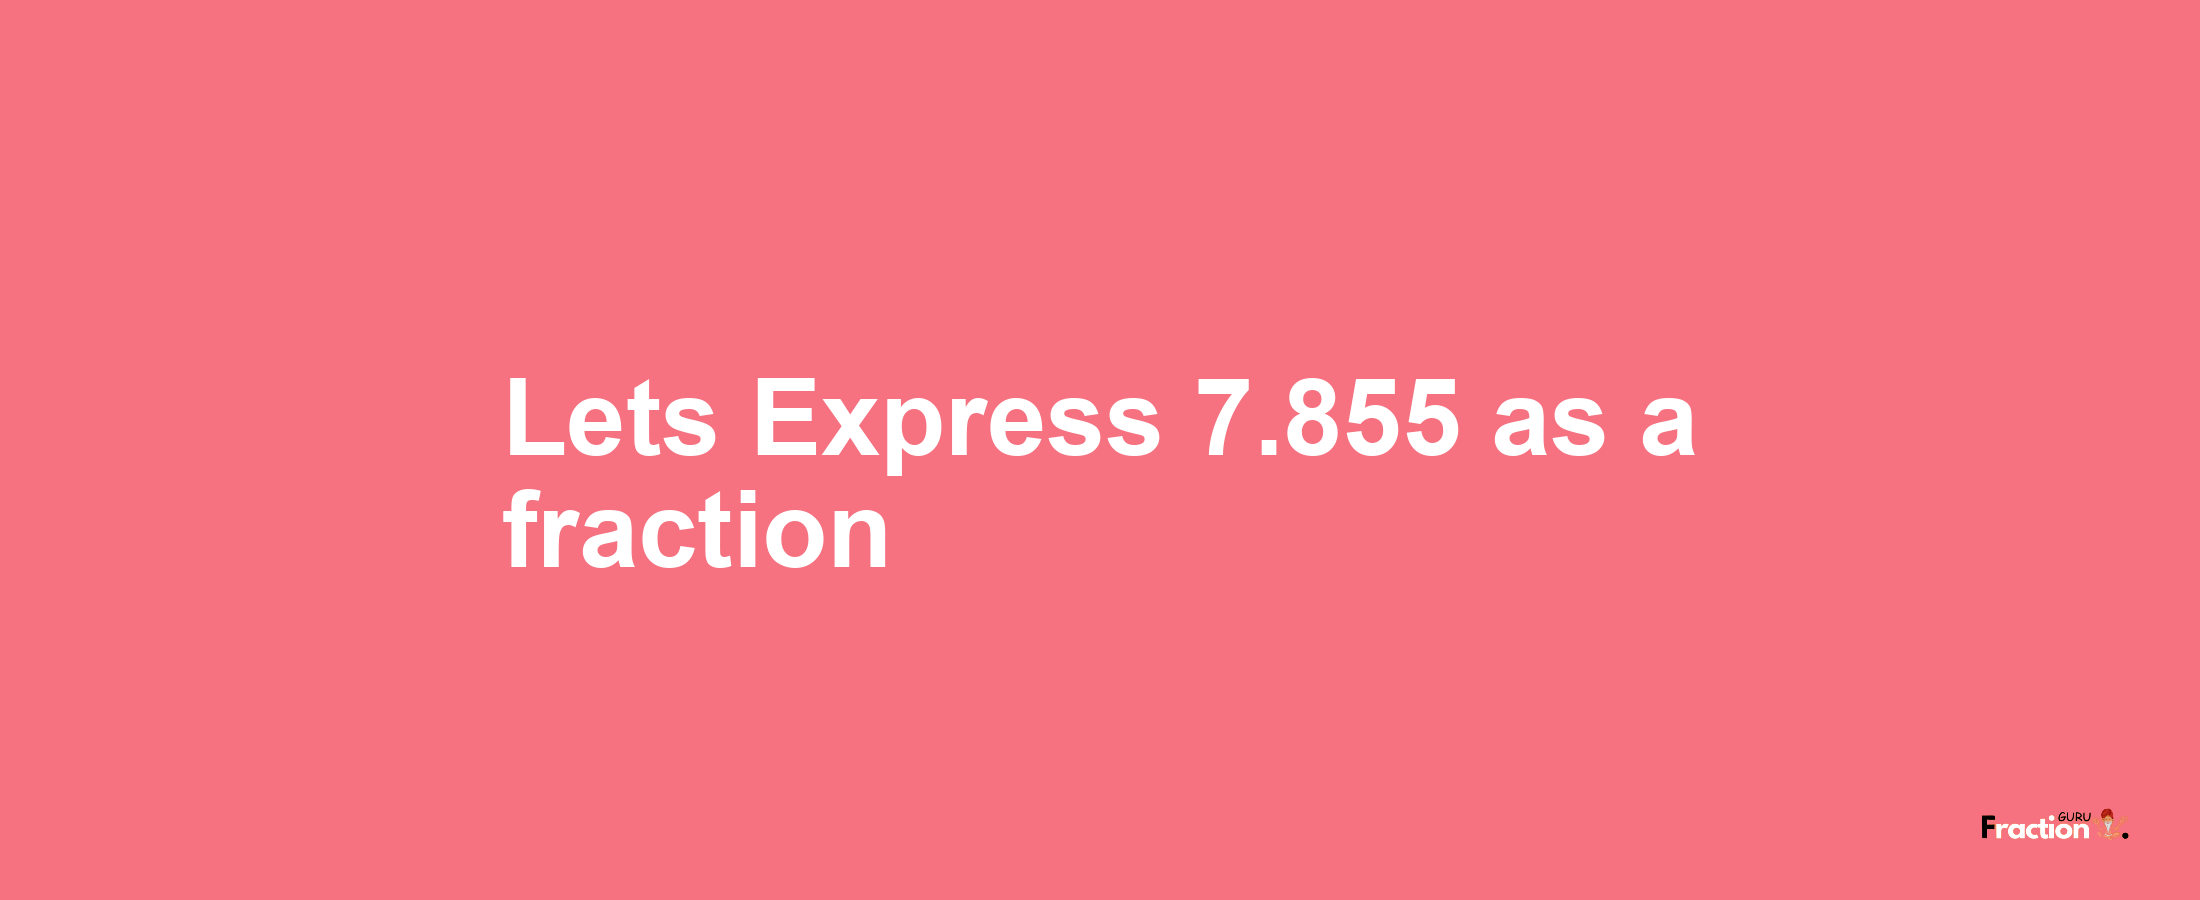 Lets Express 7.855 as afraction